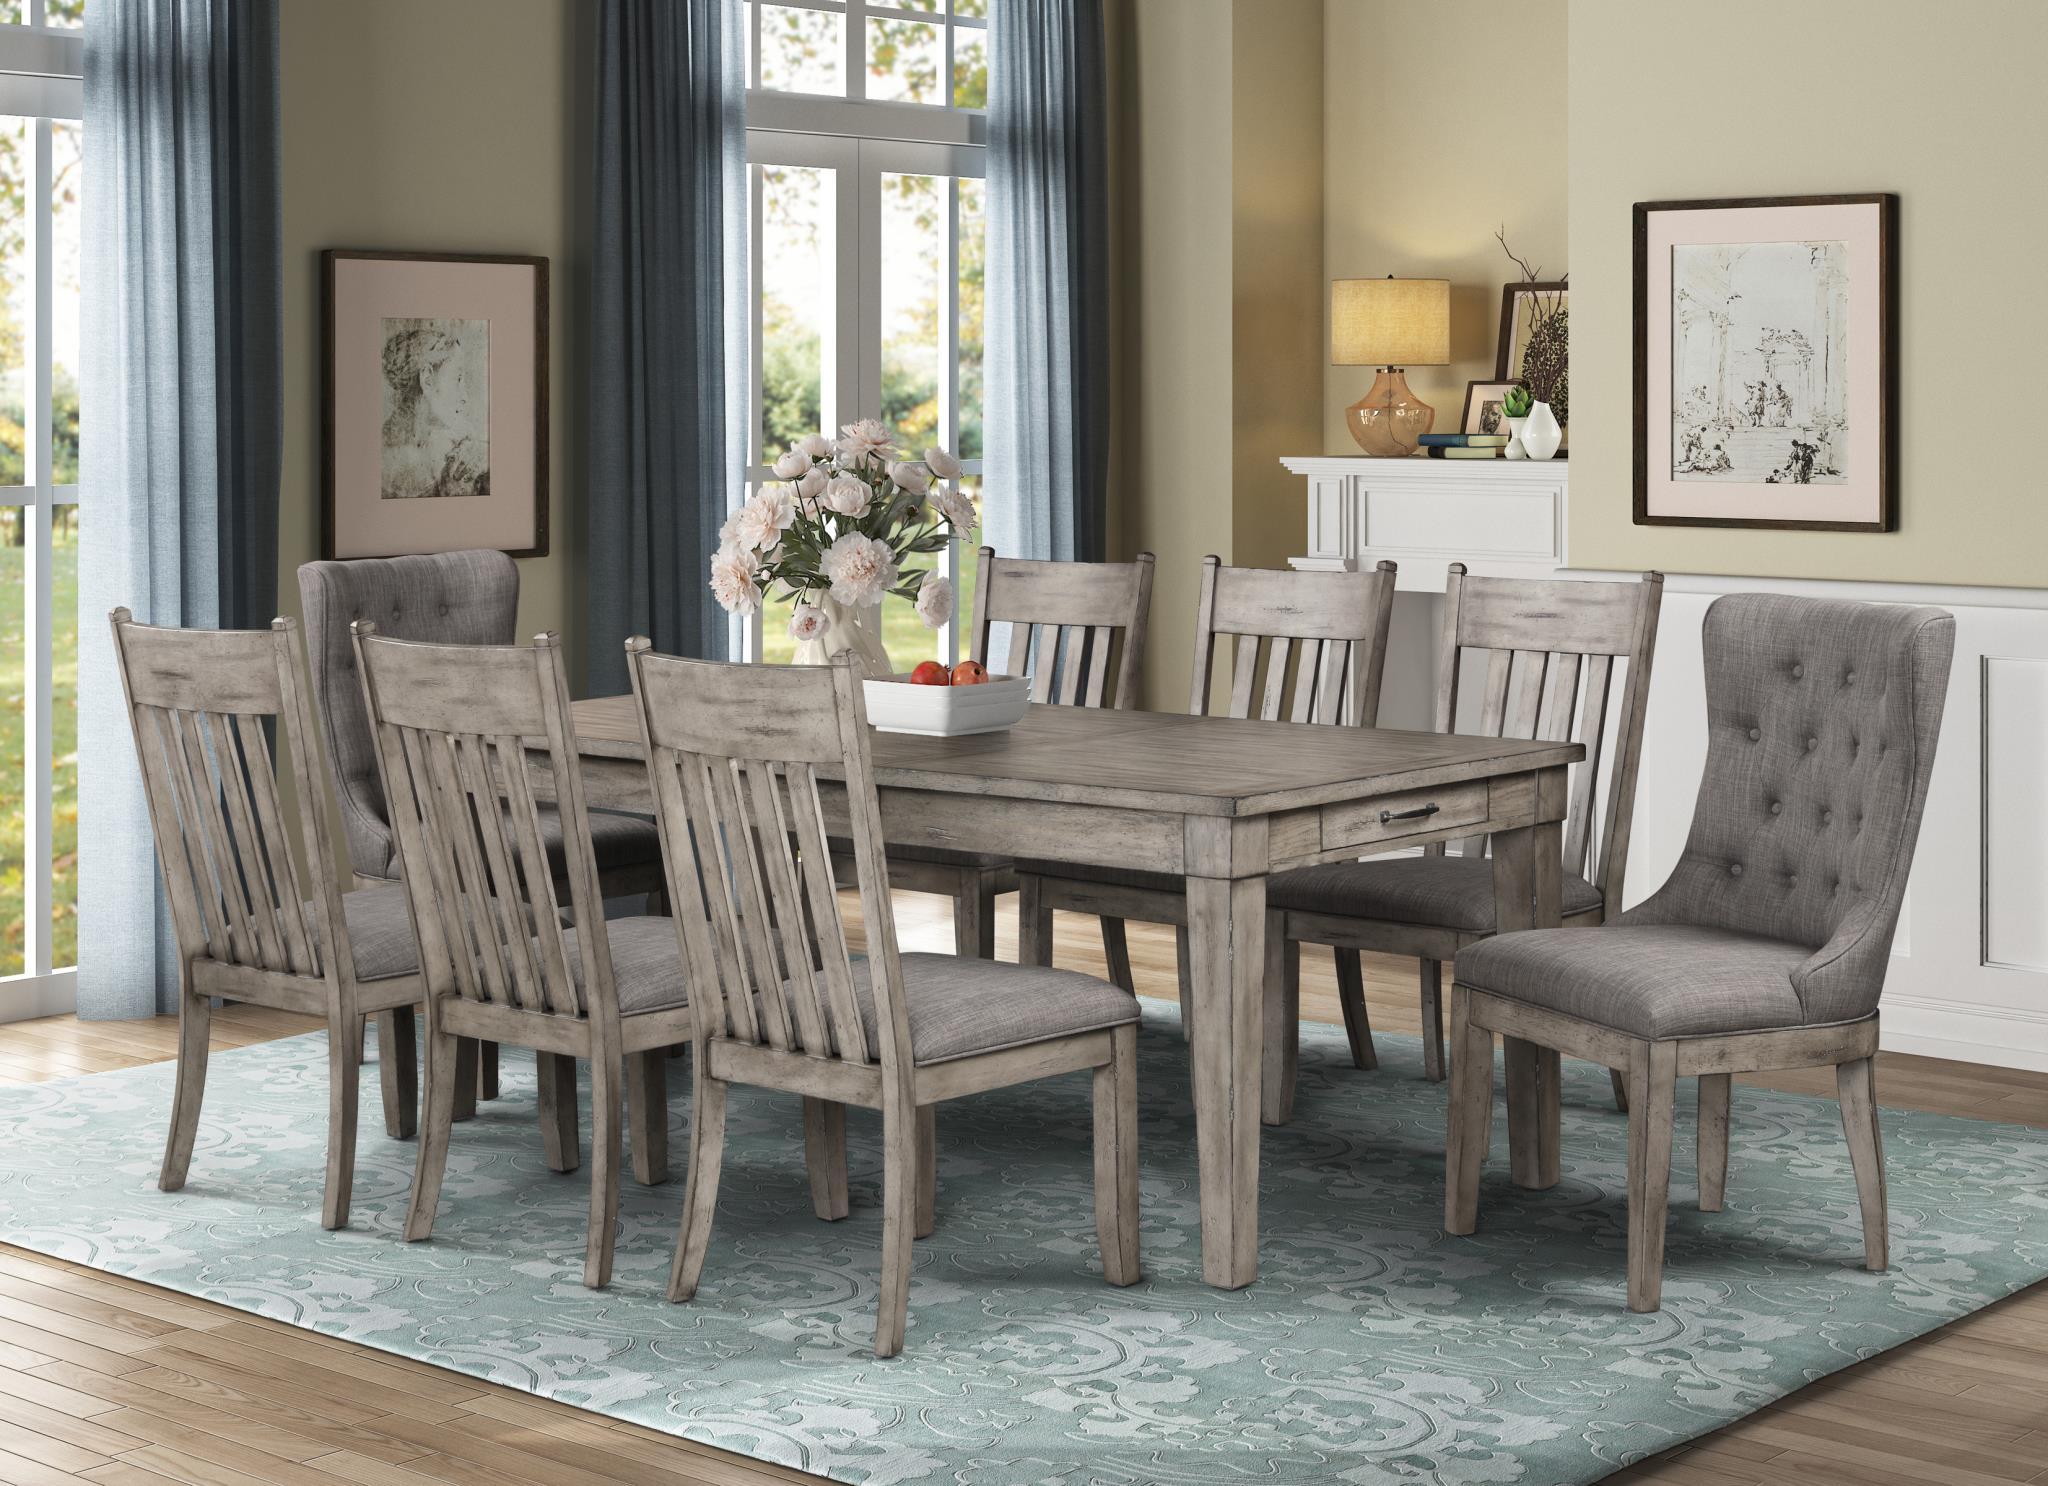 Rustic, Cottage, Farmhouse Dining Room Set Rustic Casual 1 1284-500-9pcs in Brown 